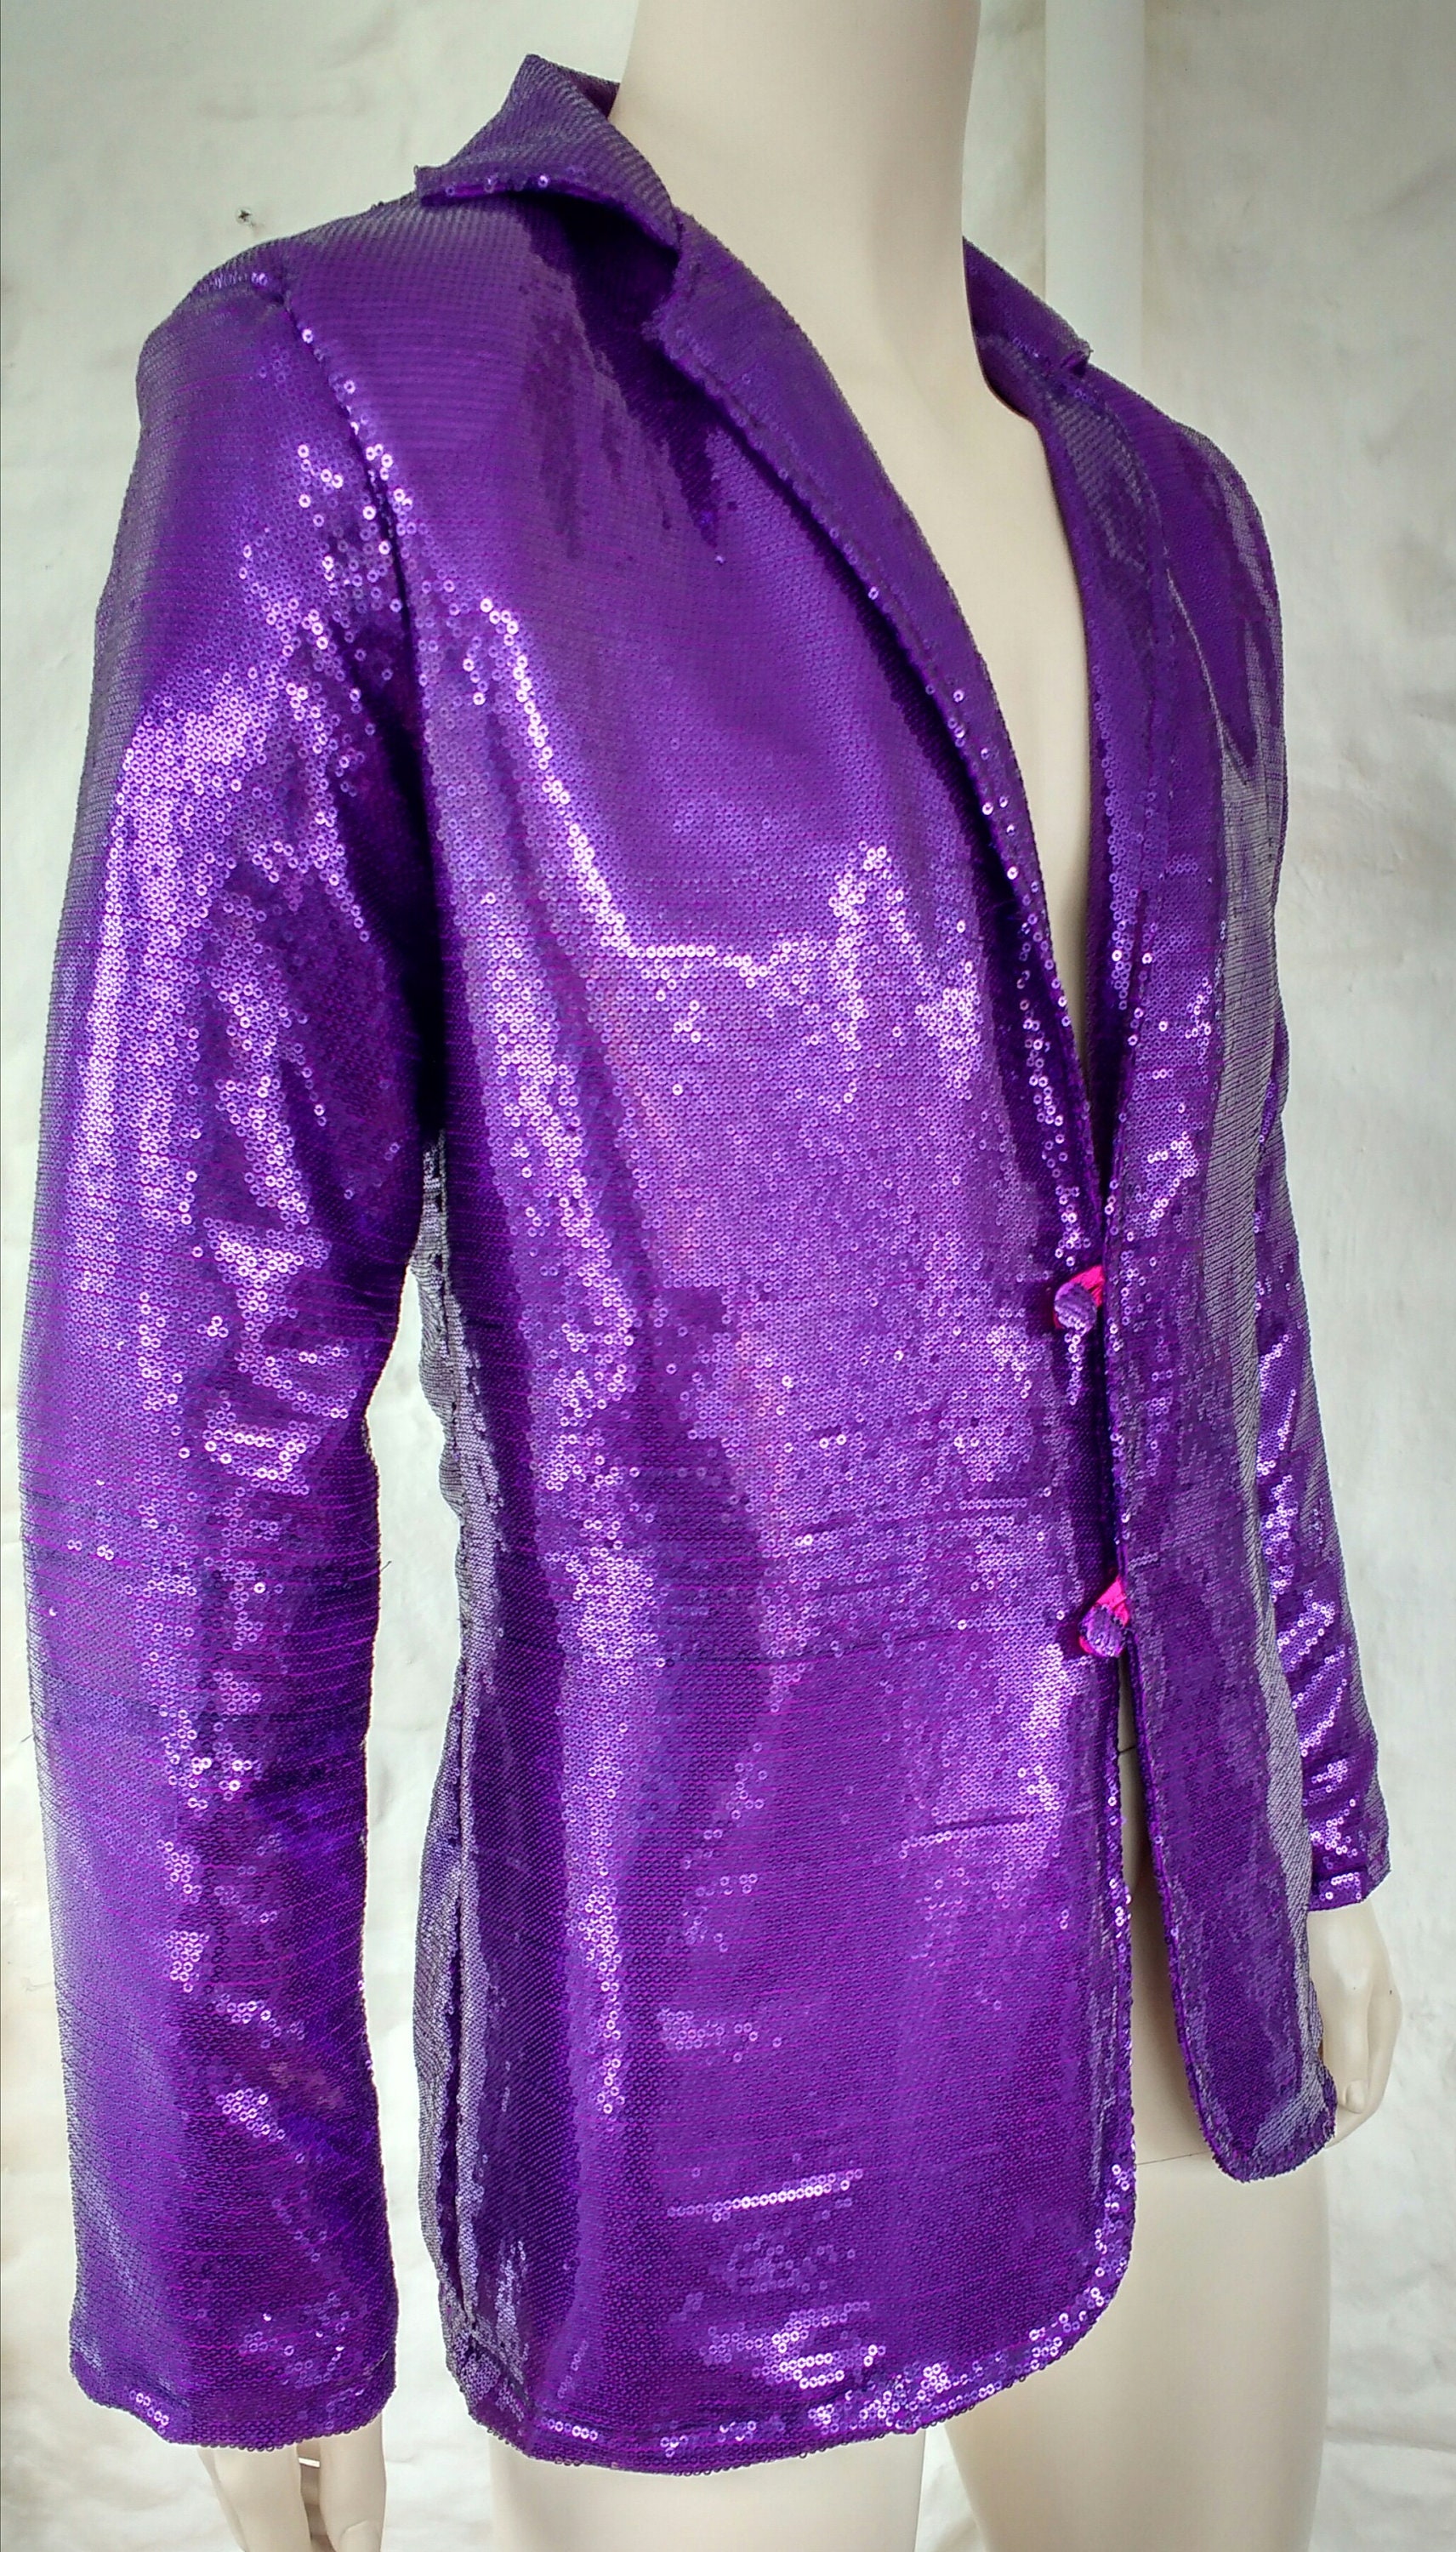 Sequin Jacket Purple, Green, and Gold Adult Striped - Medium